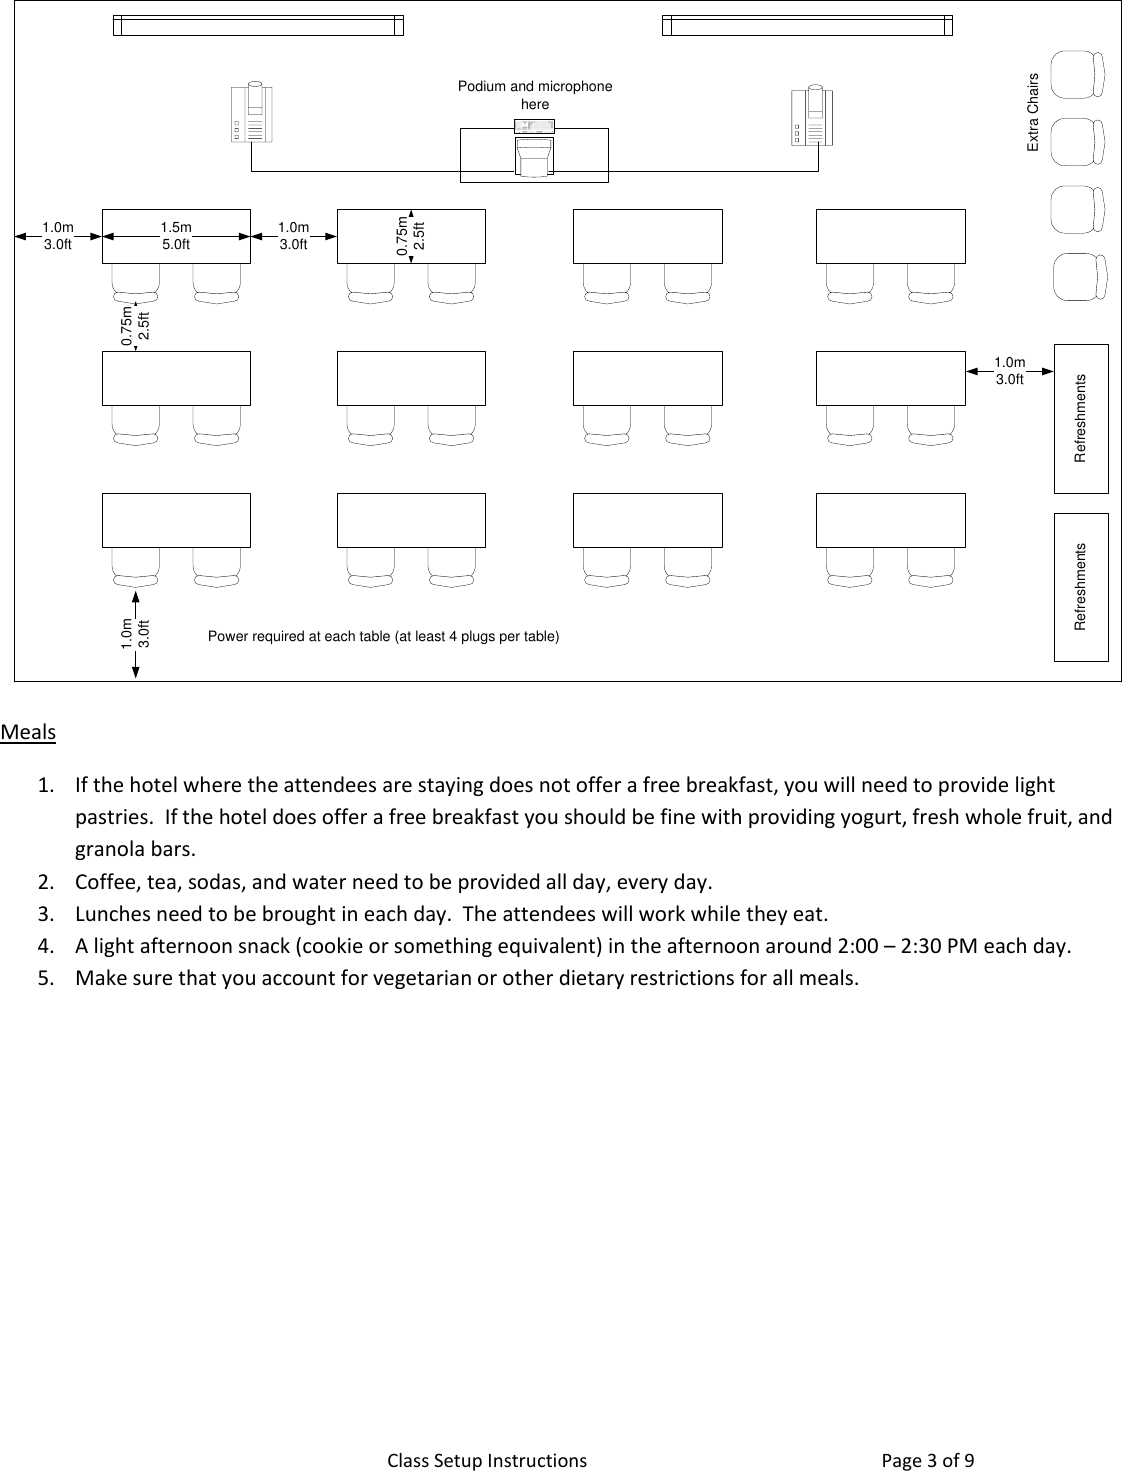 Page 3 of 9 - Class Setup Instructions